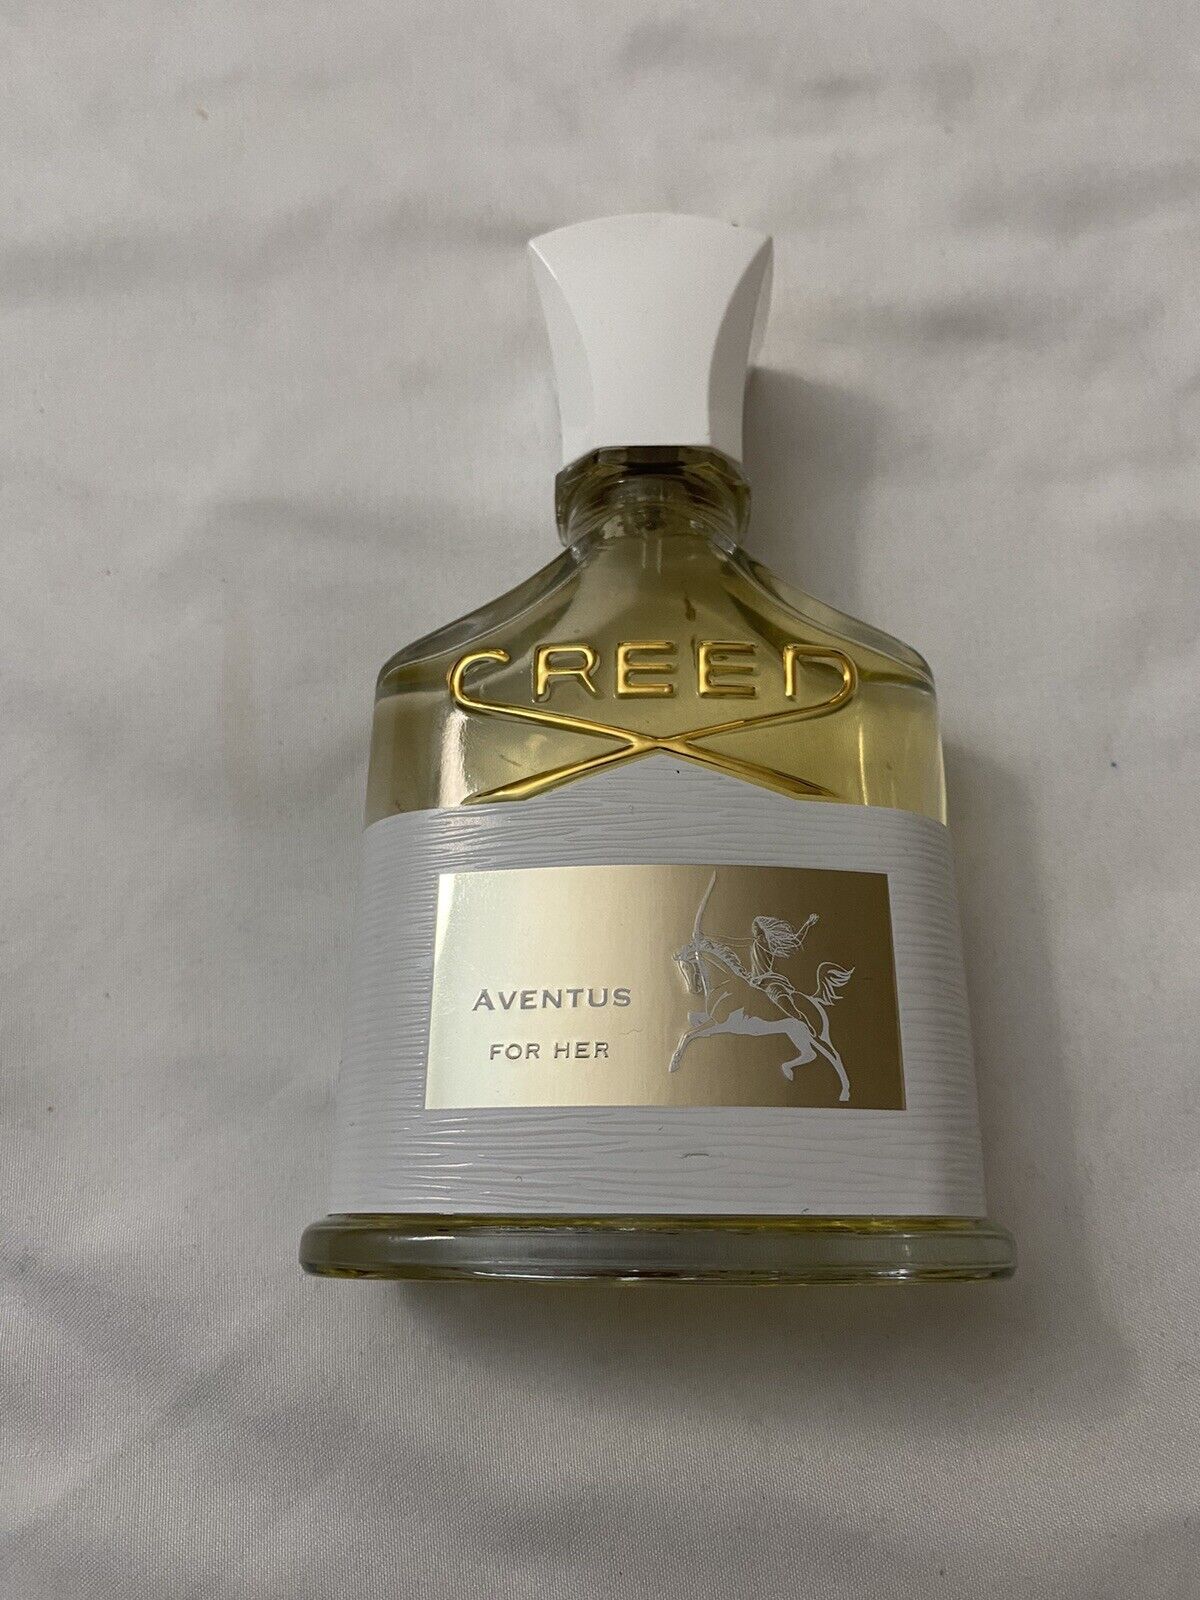 Creed Aventus For Her Factice Dummy Perfume display Bottle